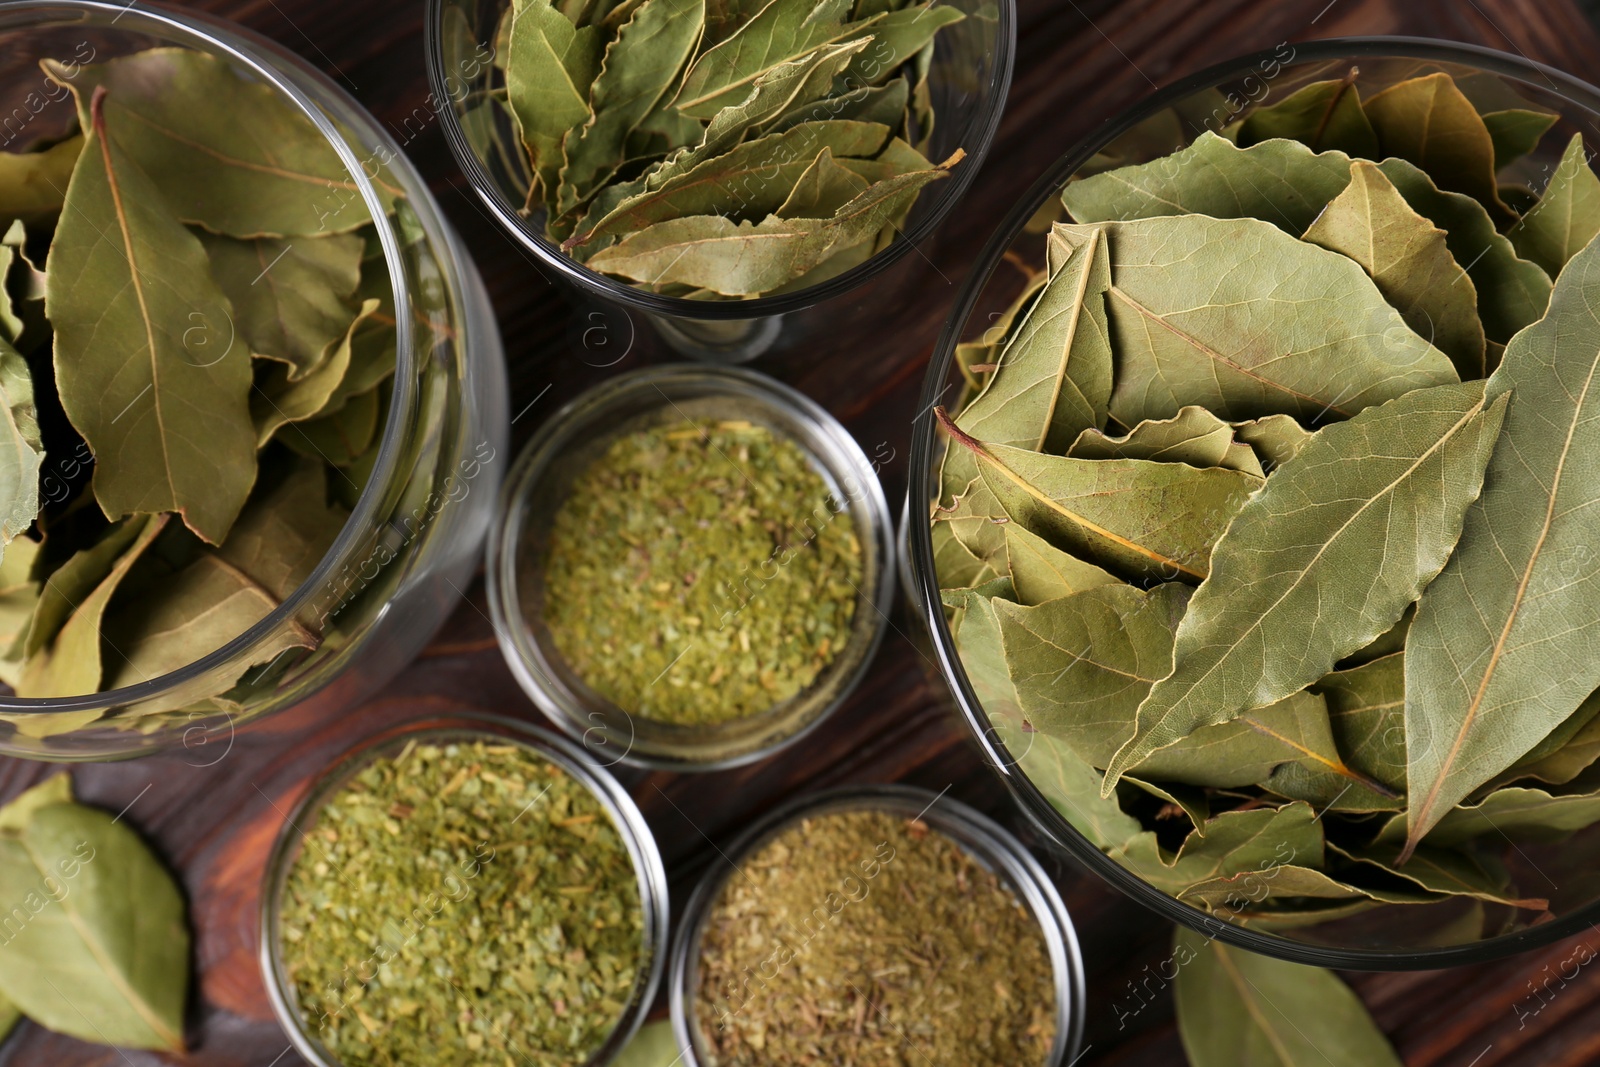 Photo of Whole and ground bay leaves on wooden table, flat lay